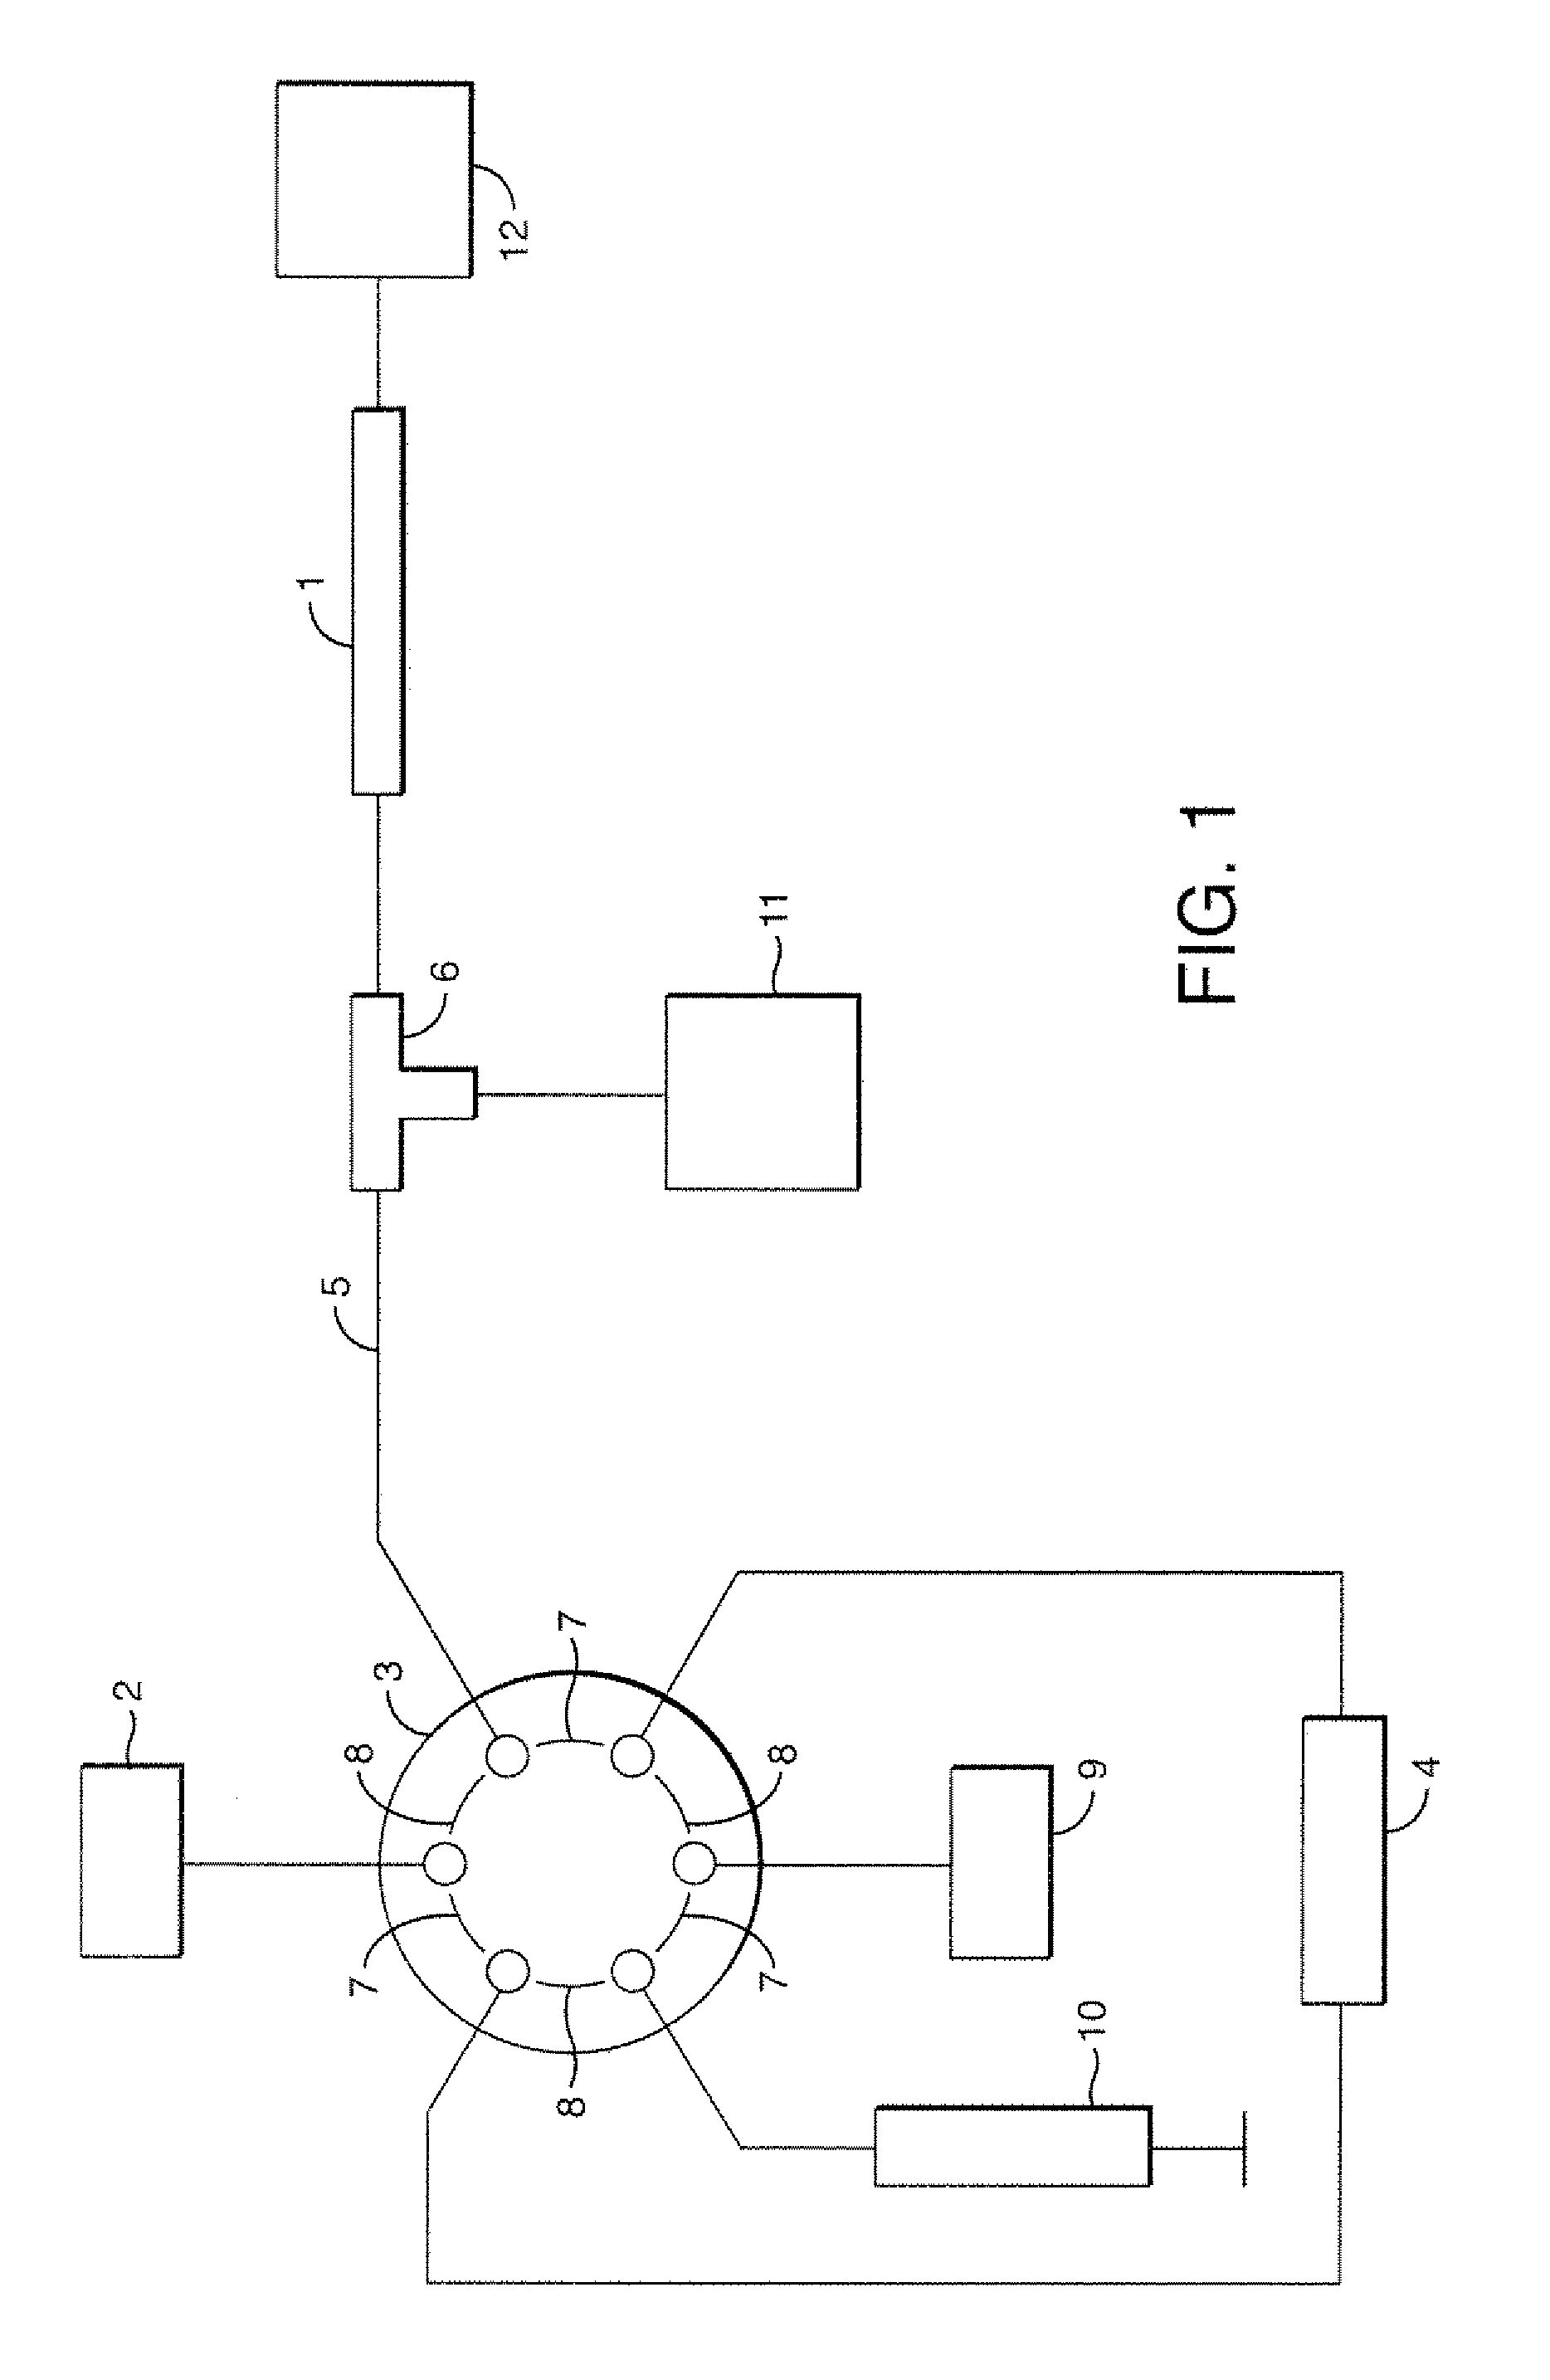 Apparatus and methods of fluid chromatography